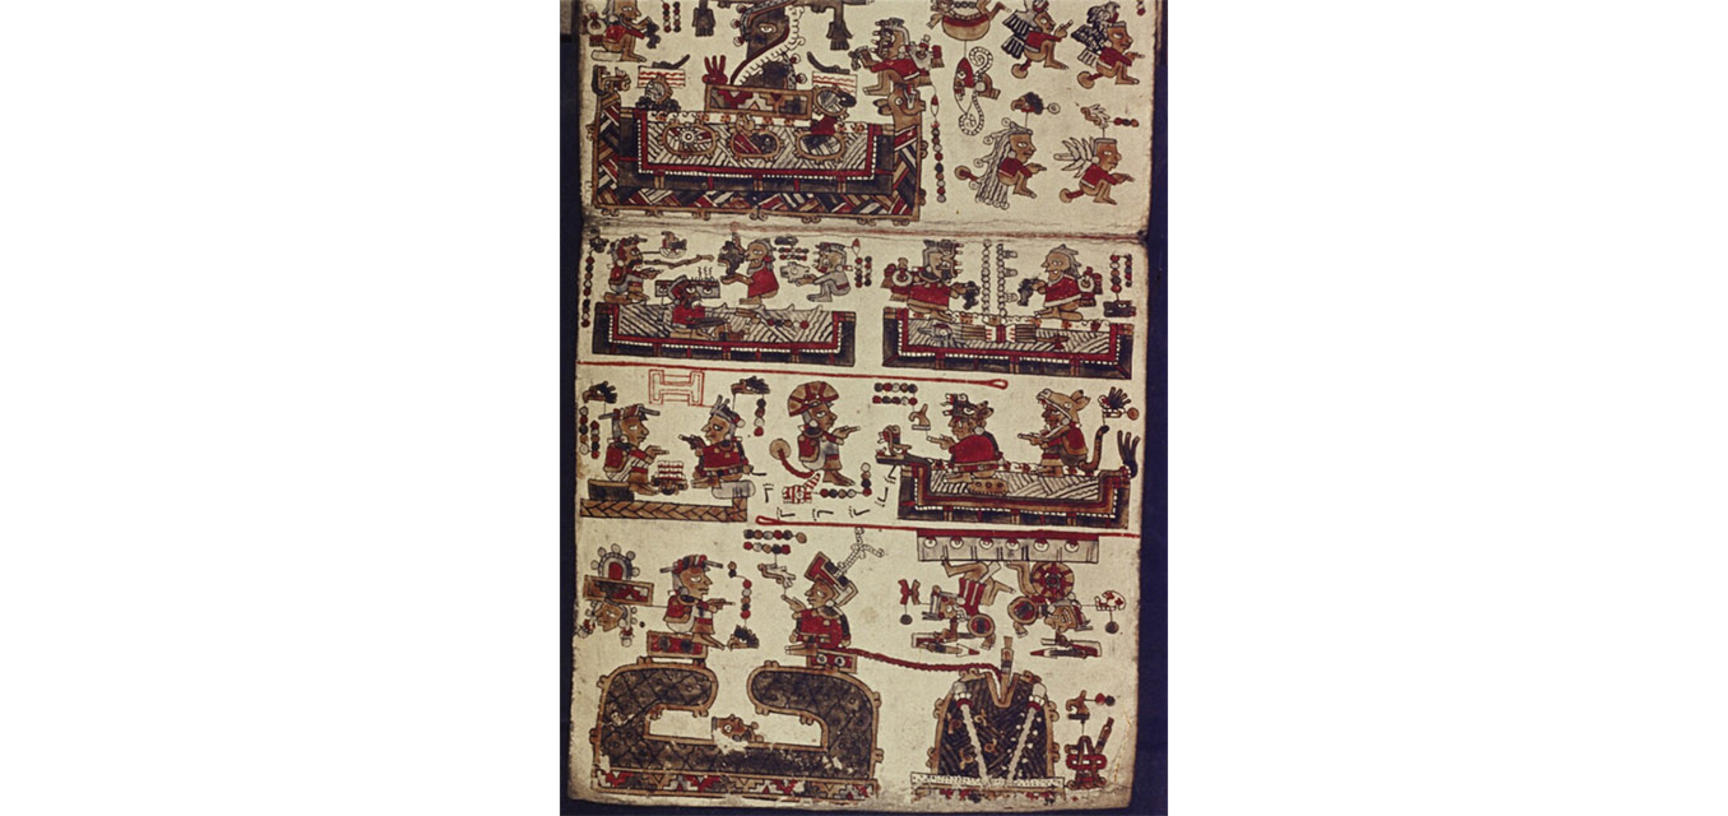 Five scene depictions of people undertaking various cultural activities, in a red and brown palette